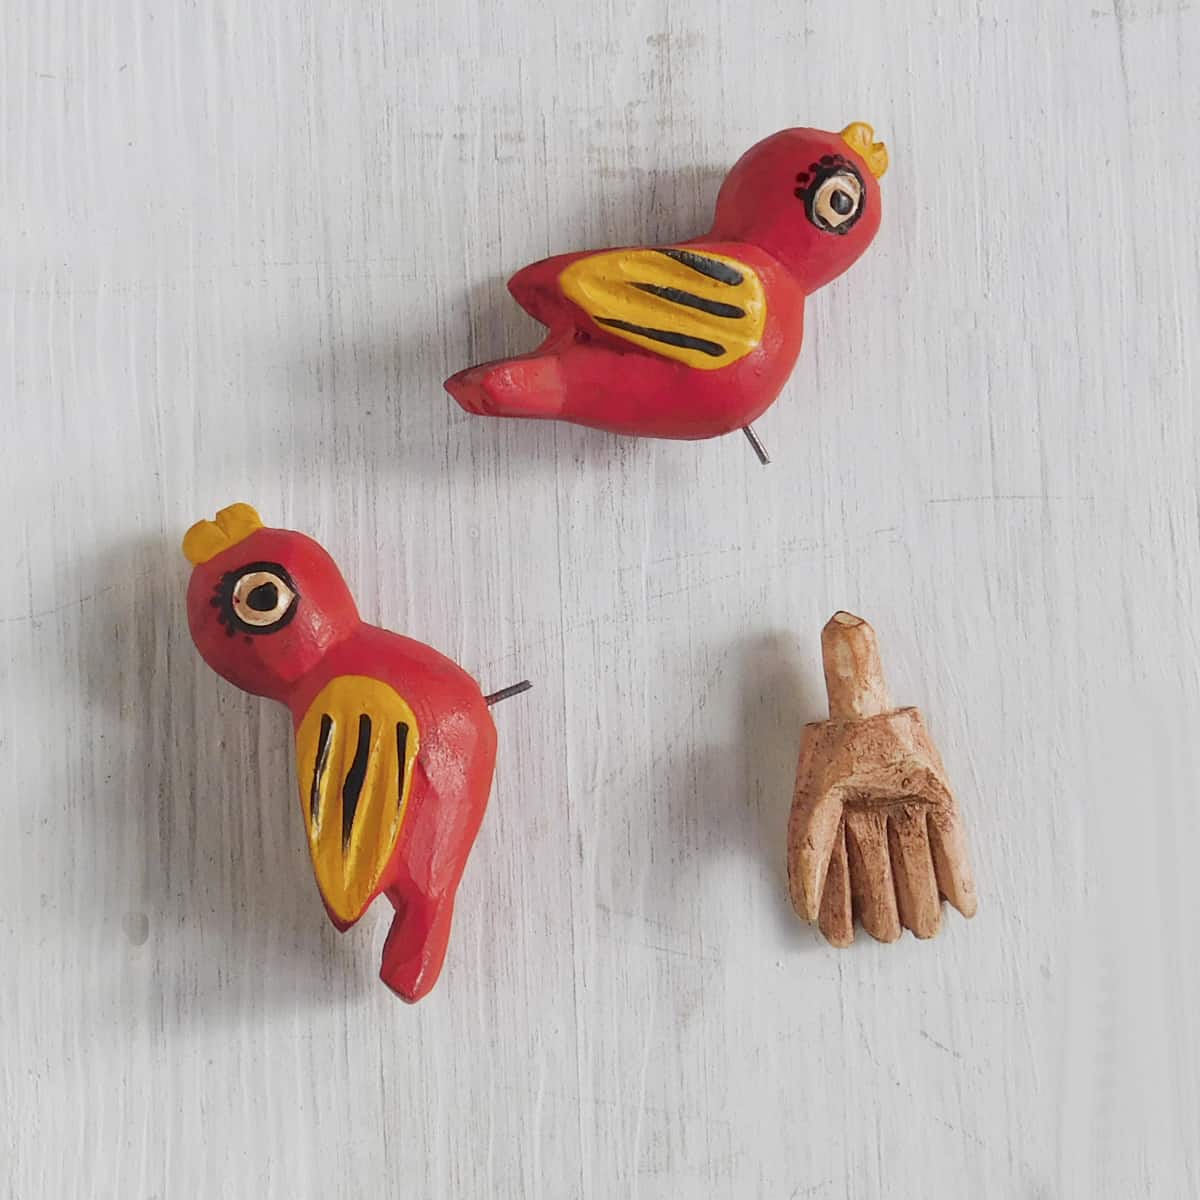 carved wooden figurines of removable birds and hand from a saint francis figurine